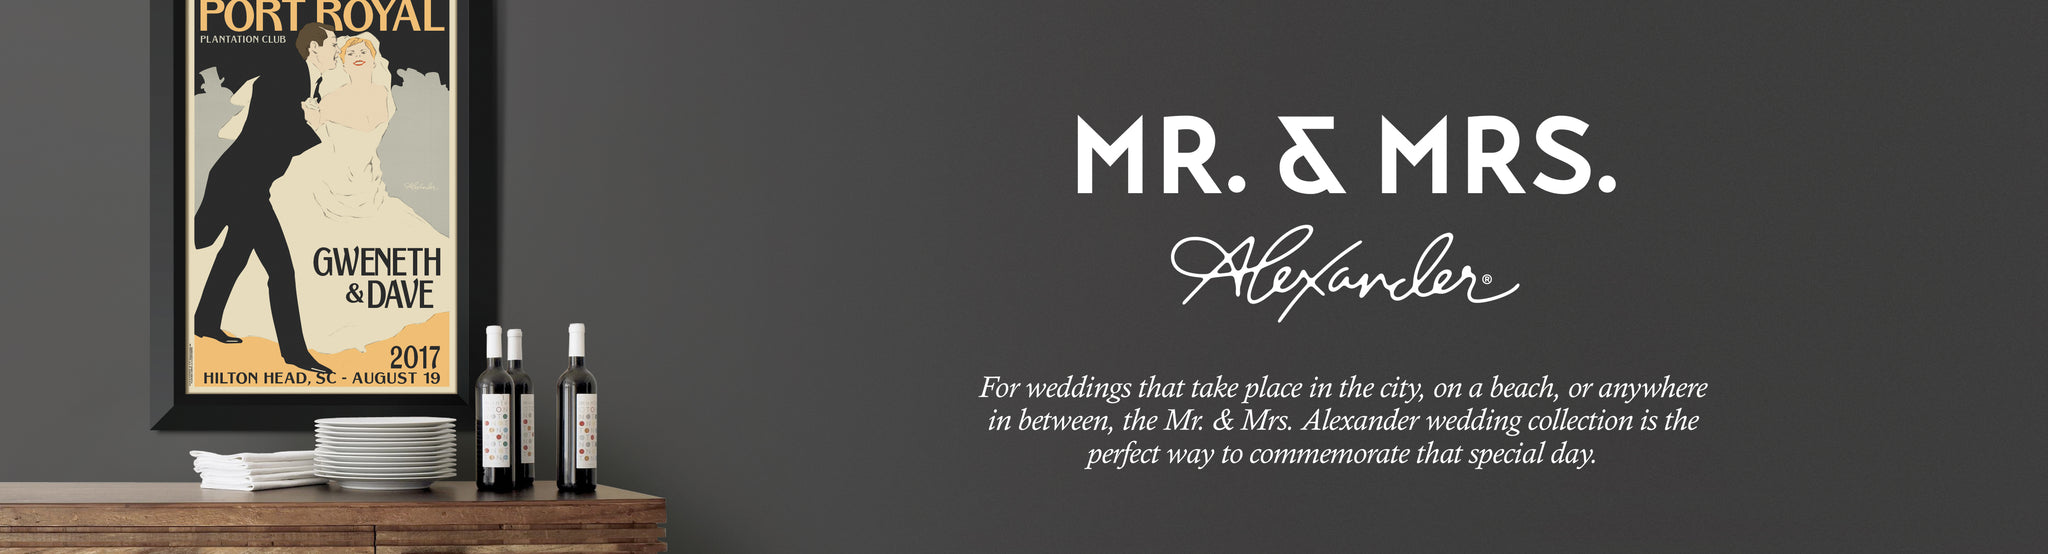 For weddings, that take place in the city, on a beach, or anywhere in between, the Mr. & Mrs. Alexander collection is the perfect way to commemorate that special day.